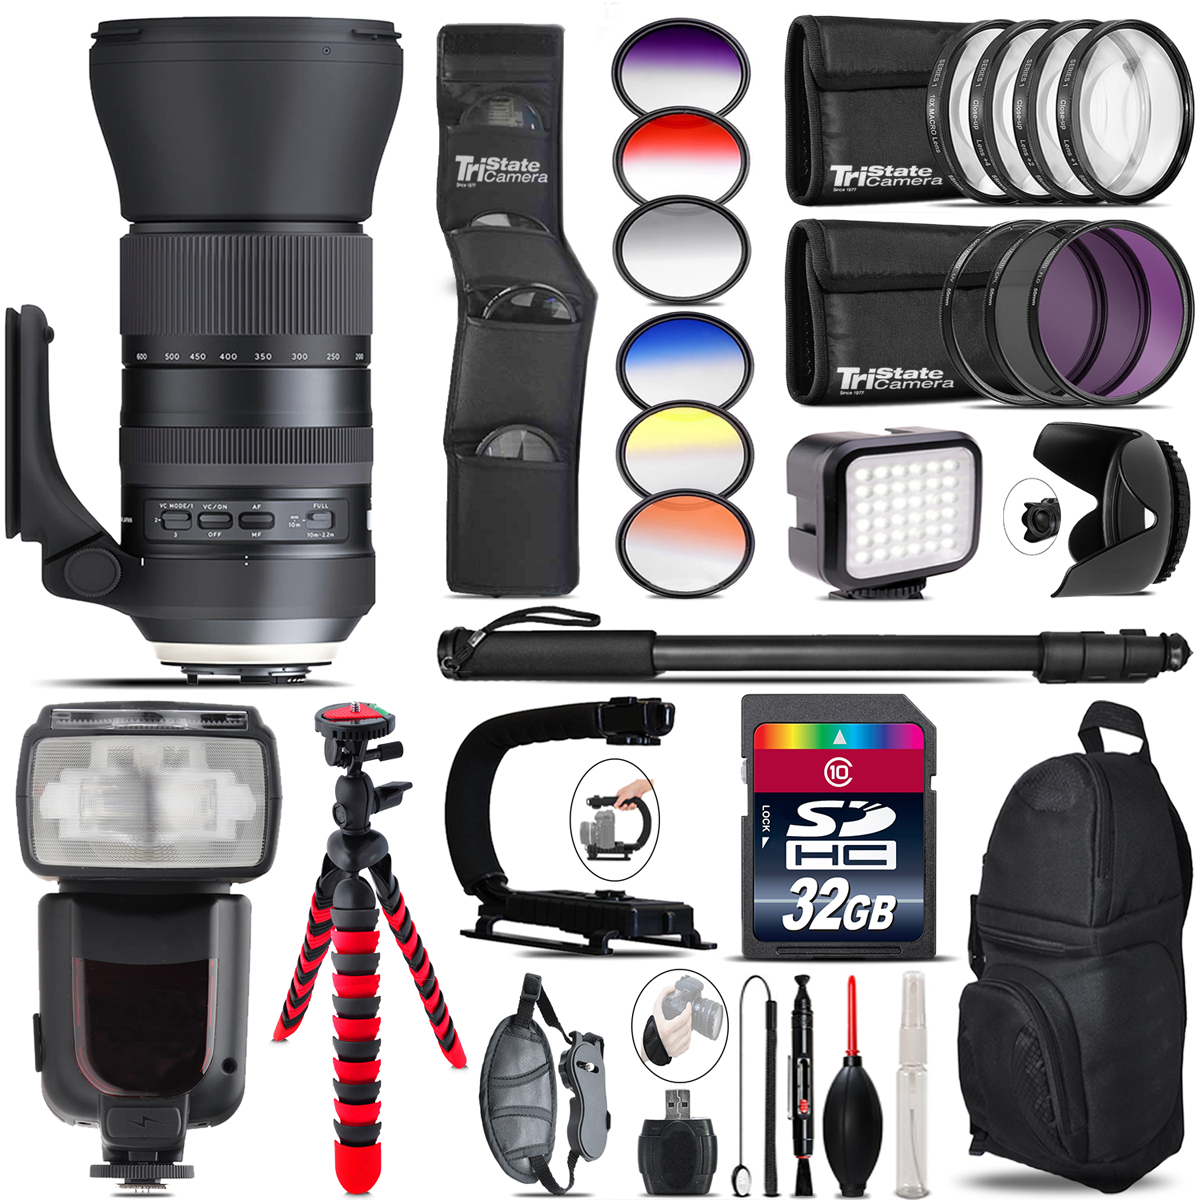 150-600mm G2 for Canon + Pro Flash + LED Light - 32GB Accessory Bundle *FREE SHIPPING*